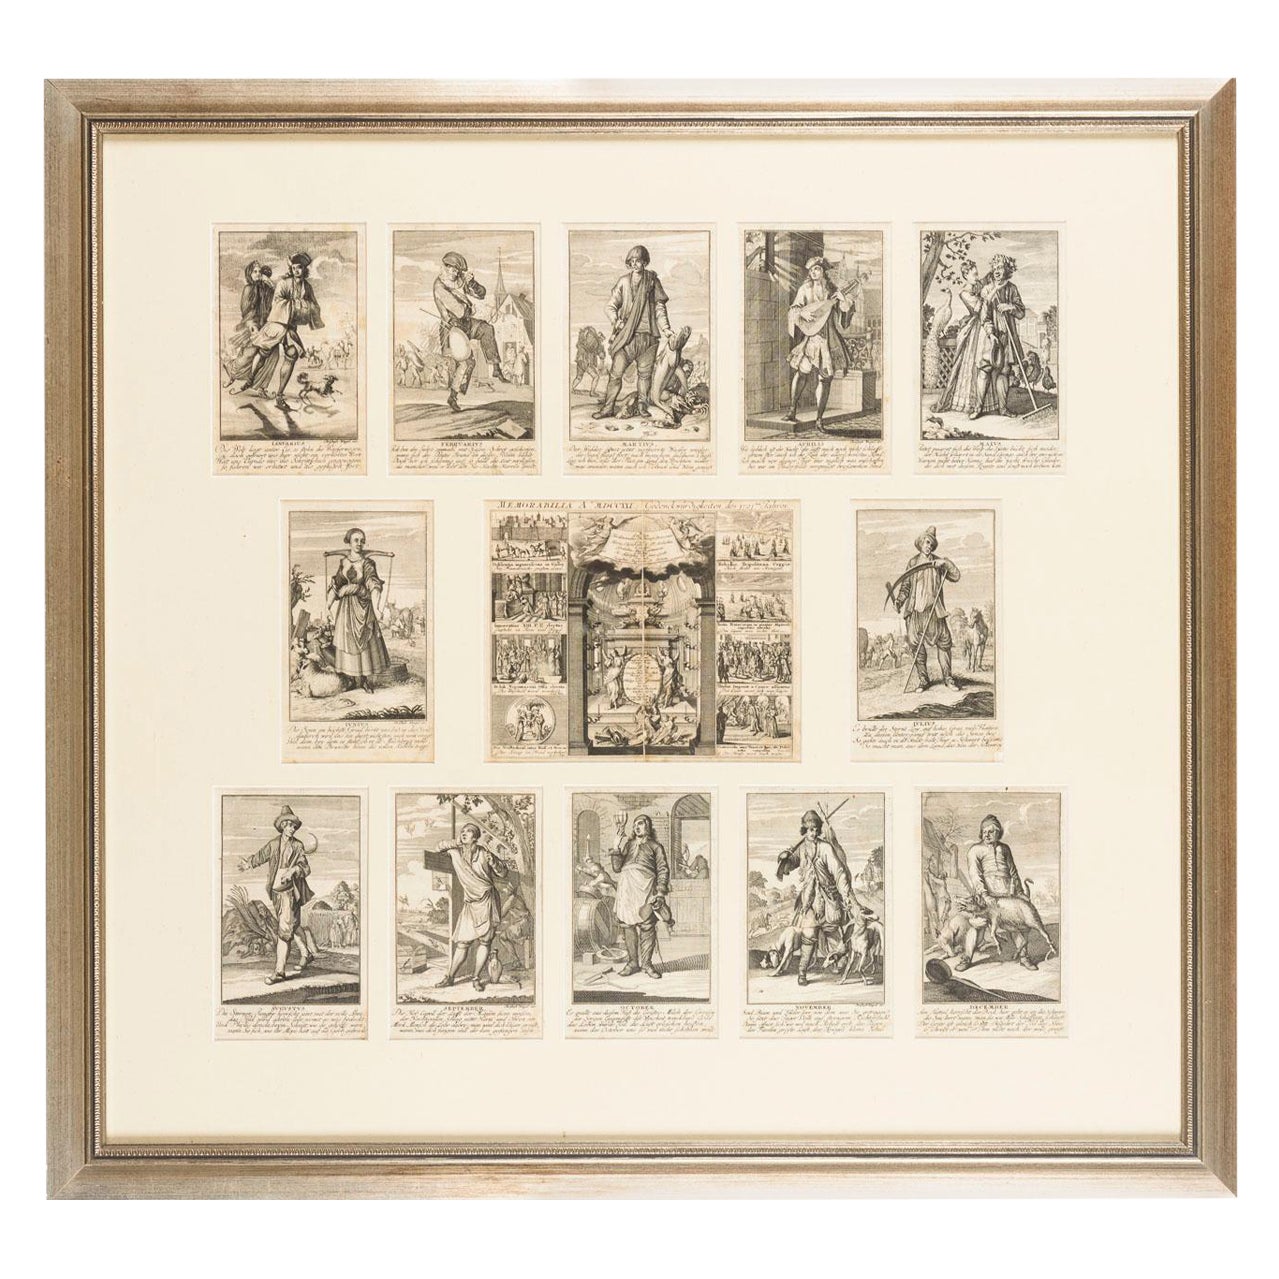 Beautiful Rare Antique Pocket Calendar for the Year 1722, Nicely Framed, c.1721